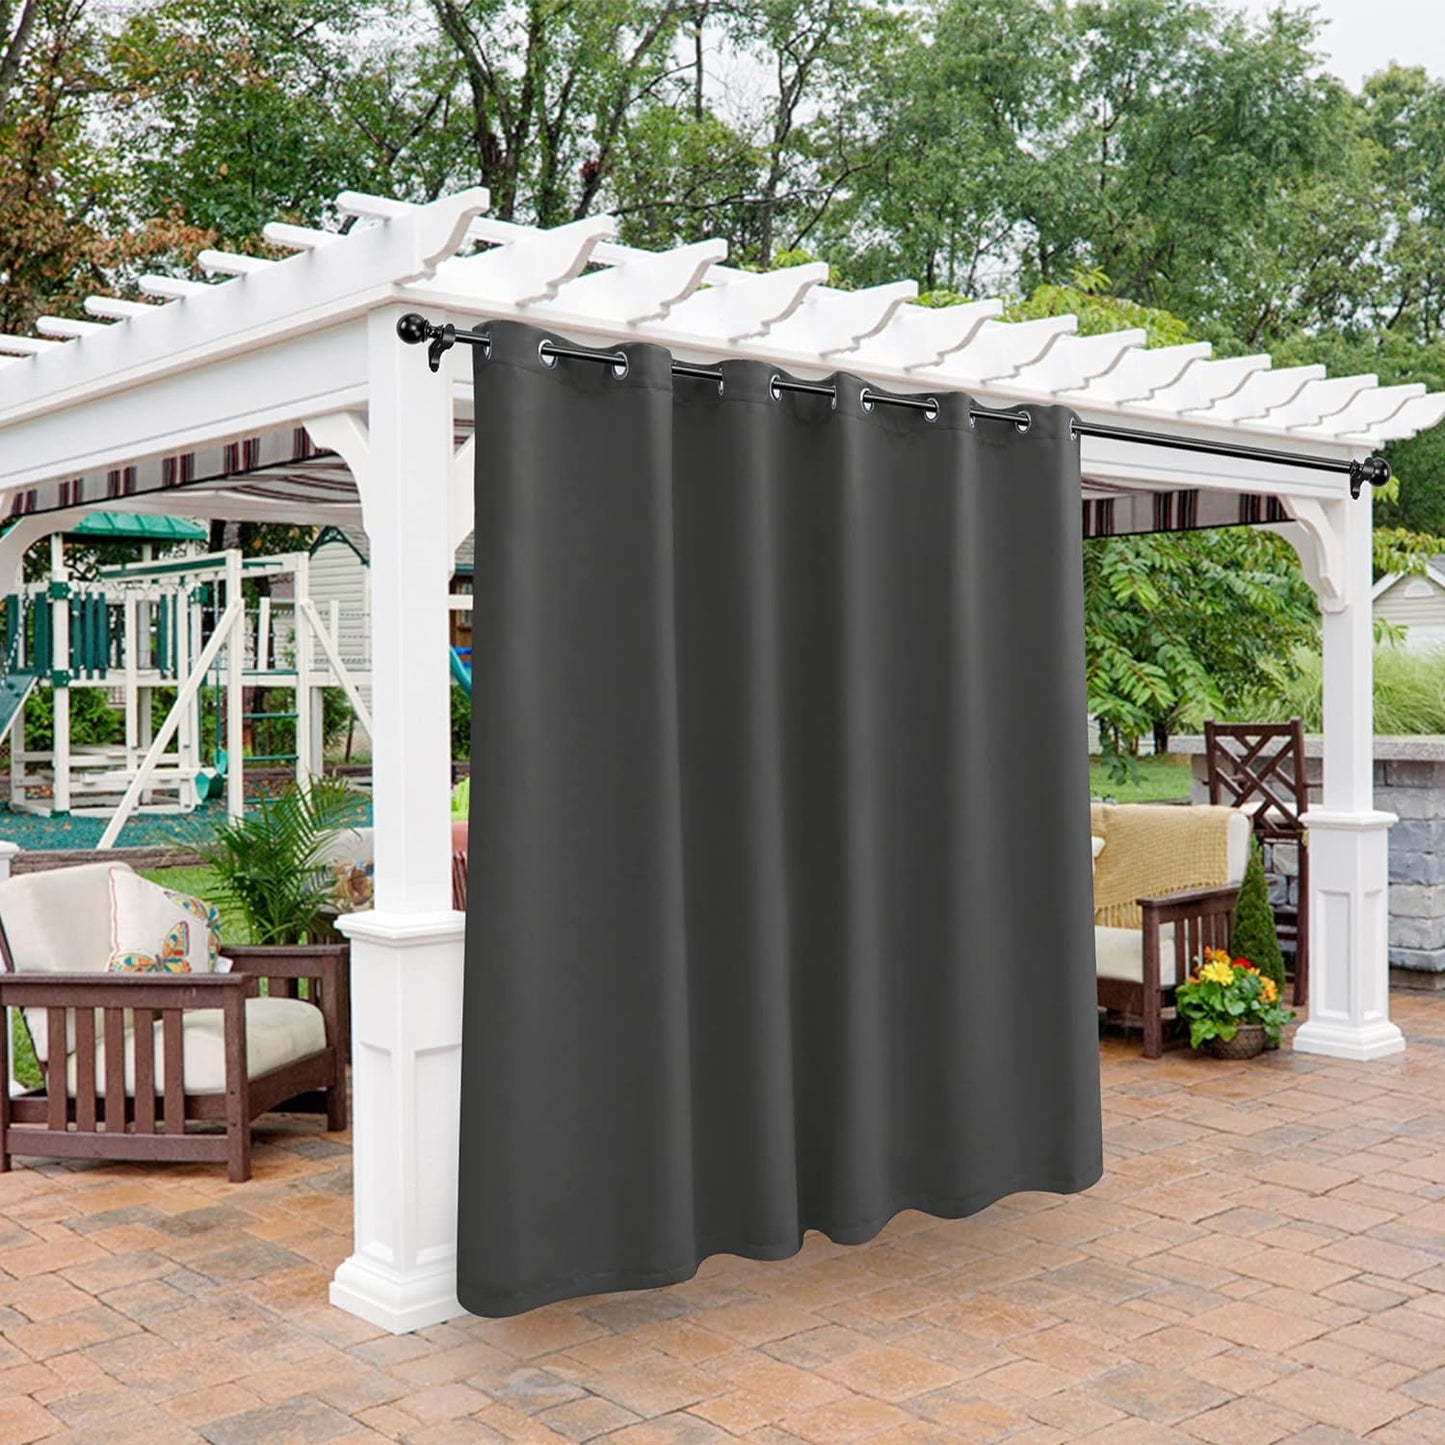 BONZER Outdoor Curtains for Patio Waterproof - Light Blocking Weather Resistant Privacy Grommet Blackout Curtains for Gazebo, Porch, Pergola, Cabana, Deck, Sunroom, 1 Panel, 52W X 84L Inch, Silver  BONZER Dark Grey 100W X 84 Inch 